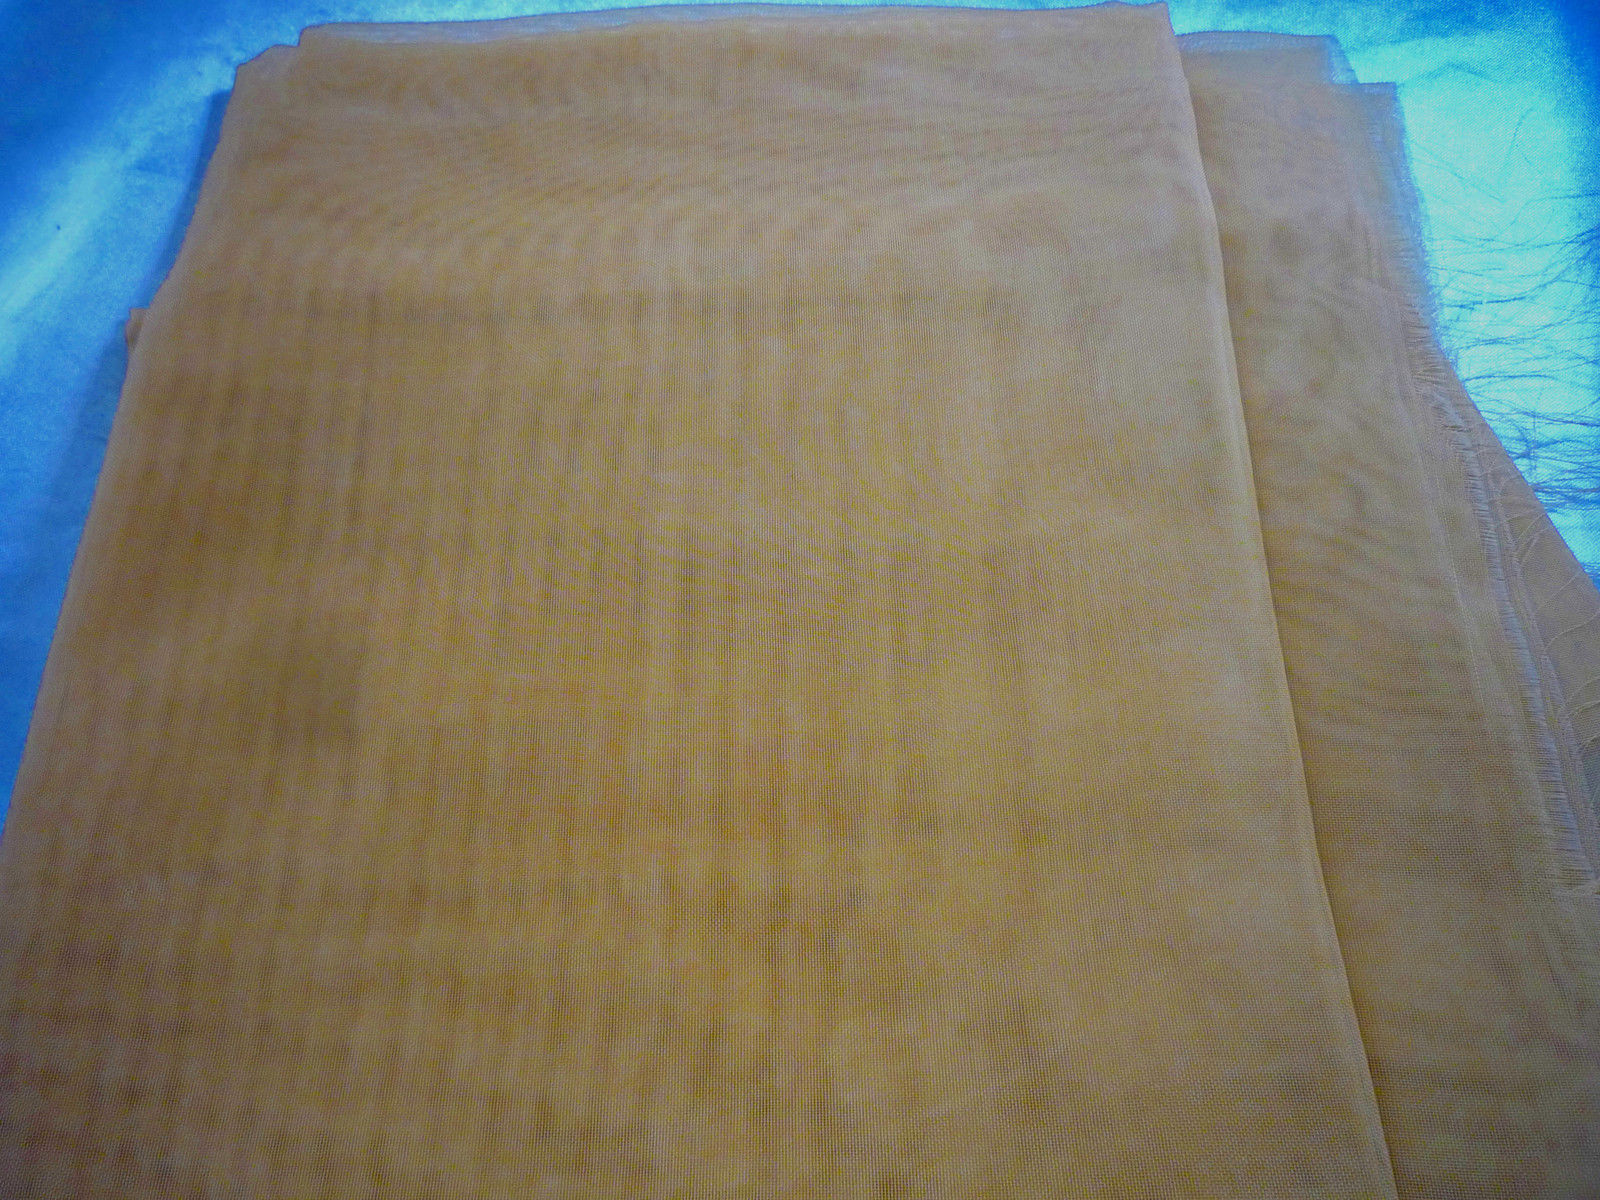 Gold Sheer Organza Fabric Remnant  28 x 22 Polyester - $2.00